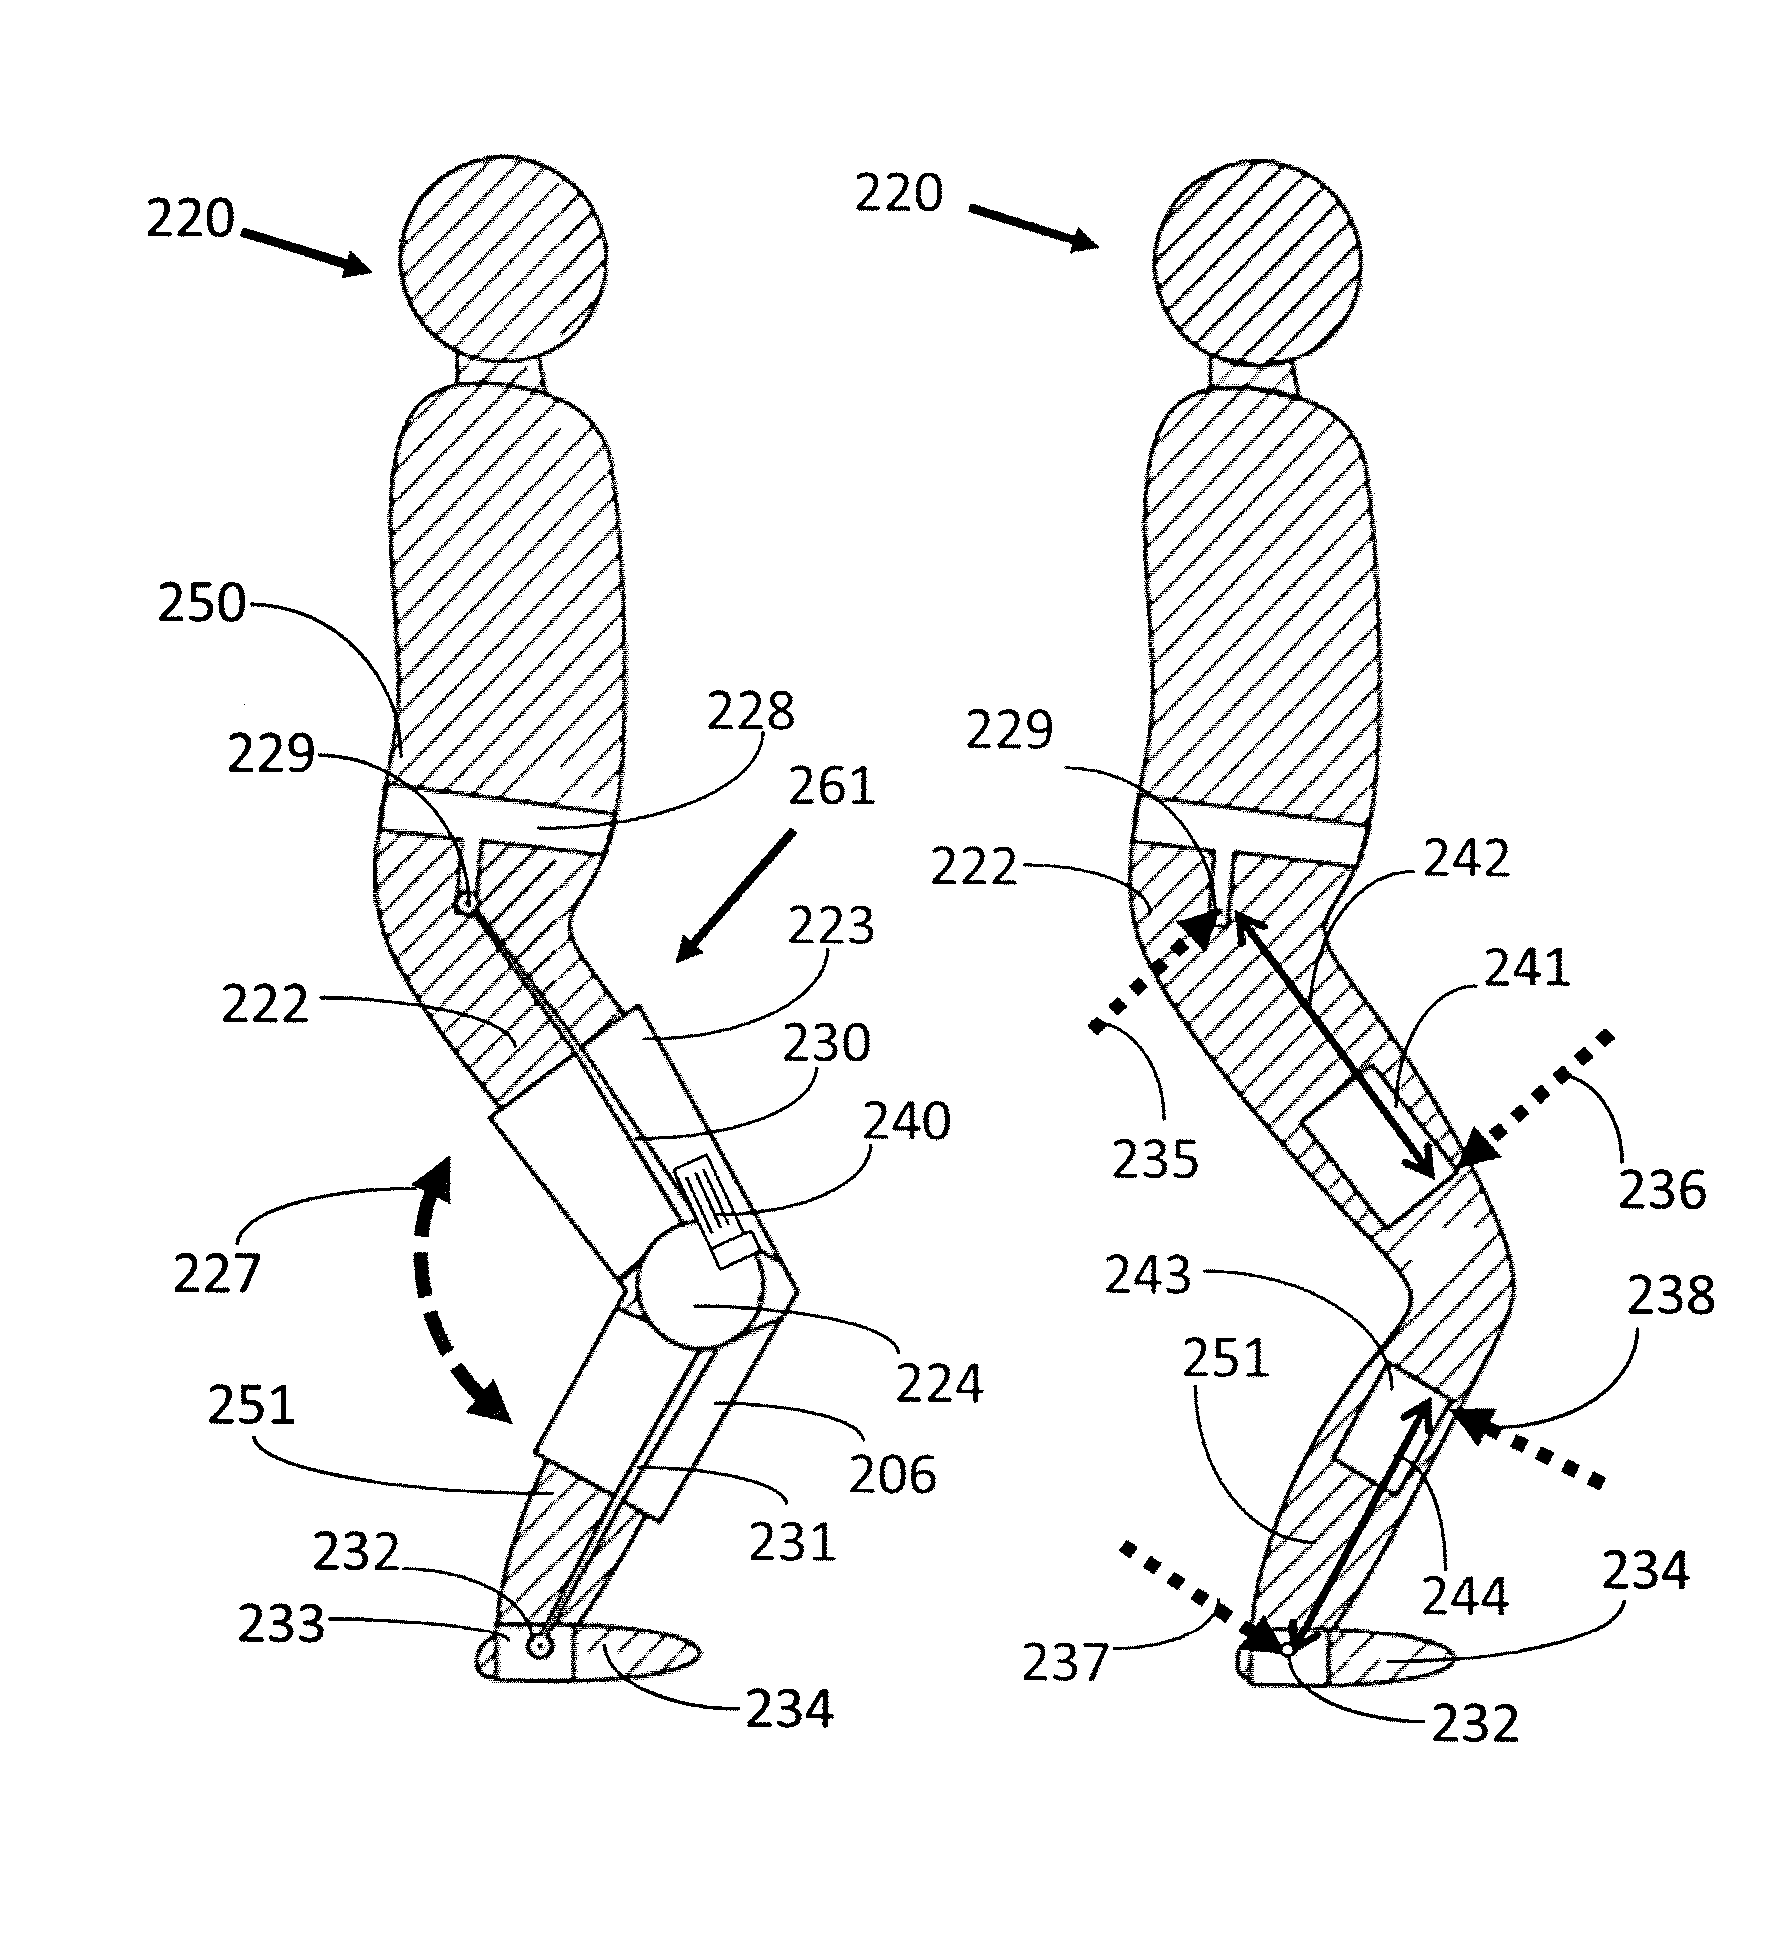 Machine to Human Interfaces for Communication from a Lower Extremity Orthotic